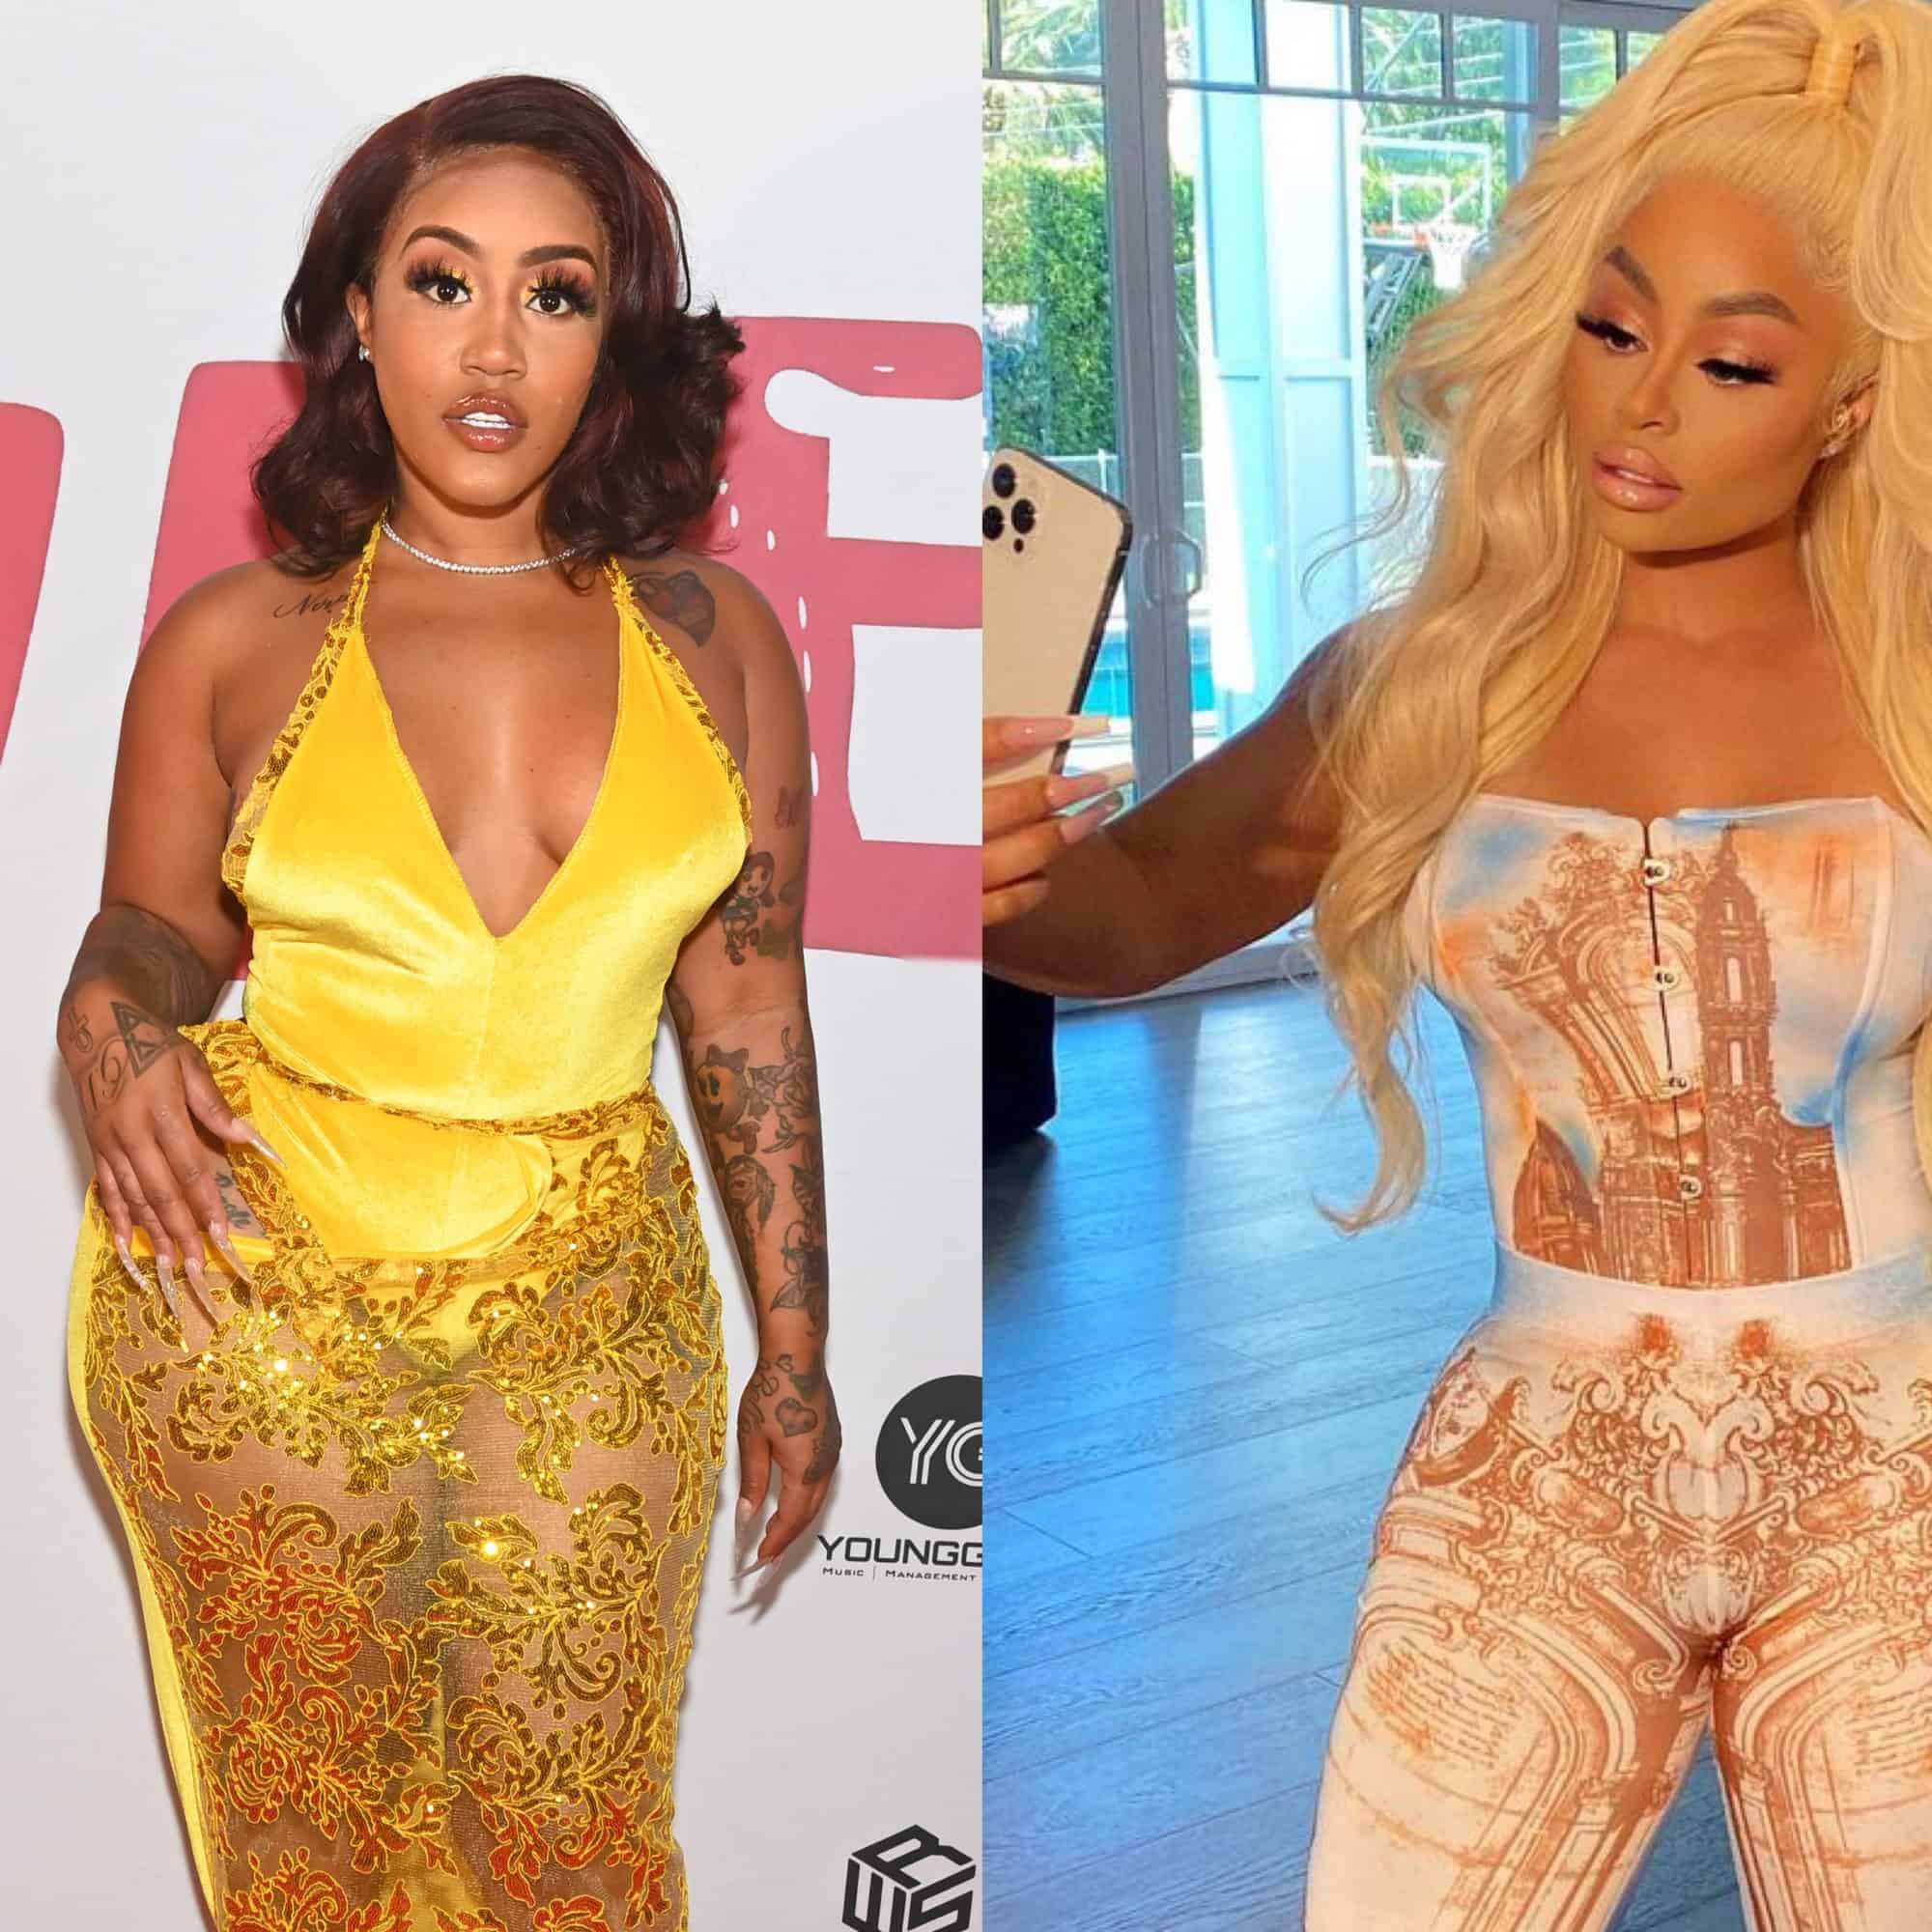 Jhonni Blaze challenges Blac Chyna over similarities to music movies